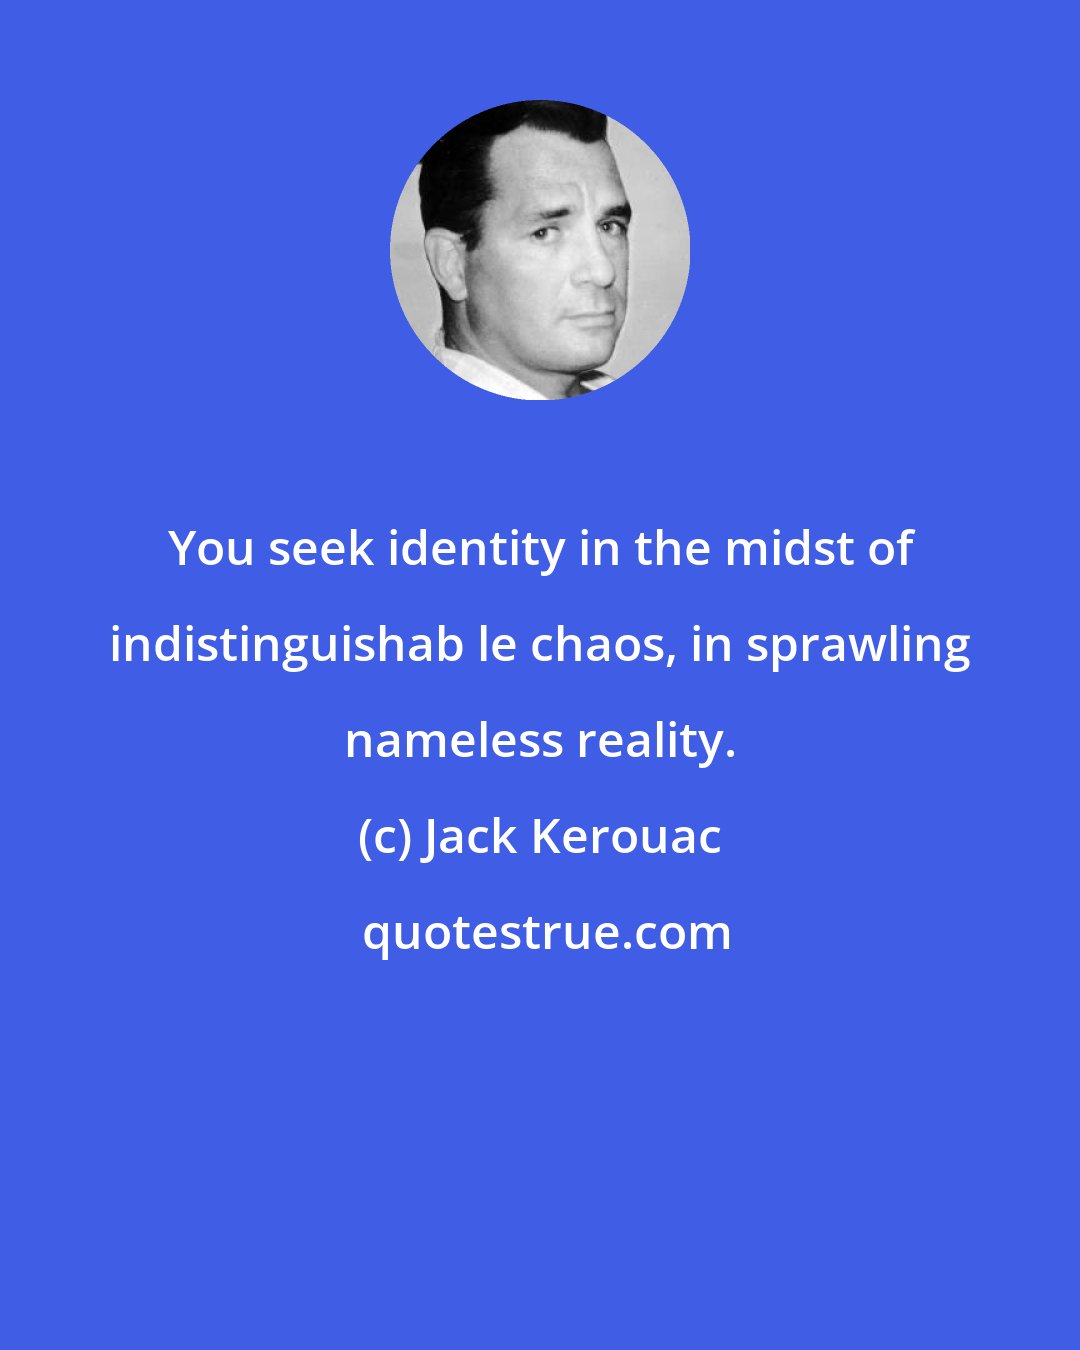 Jack Kerouac: You seek identity in the midst of indistinguishab le chaos, in sprawling nameless reality.